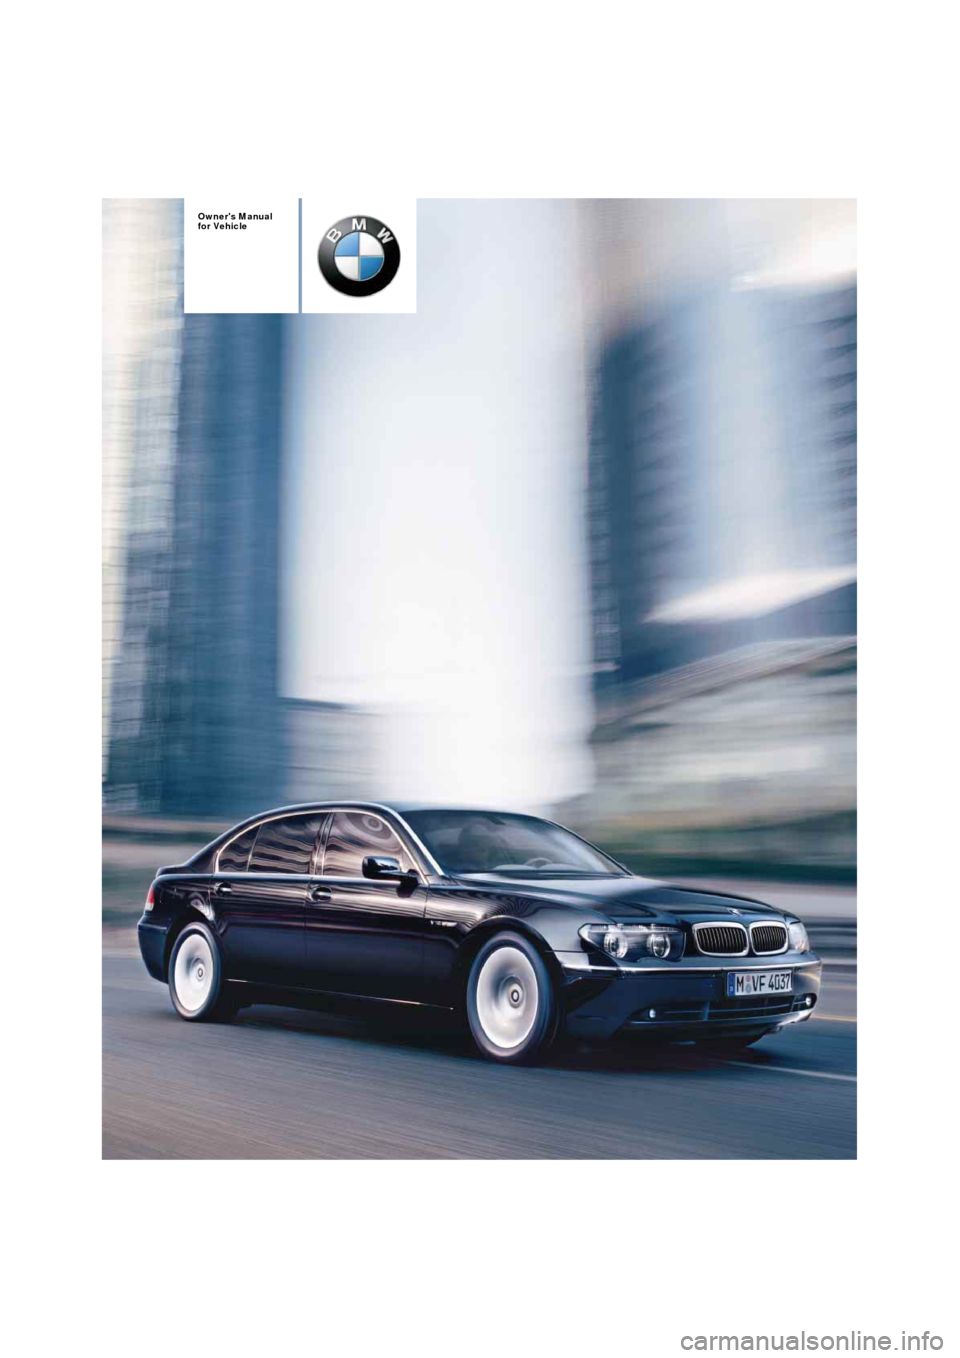 BMW 760i 2004 E65 Owners Manual  
Owners Manual
for Vehicle 